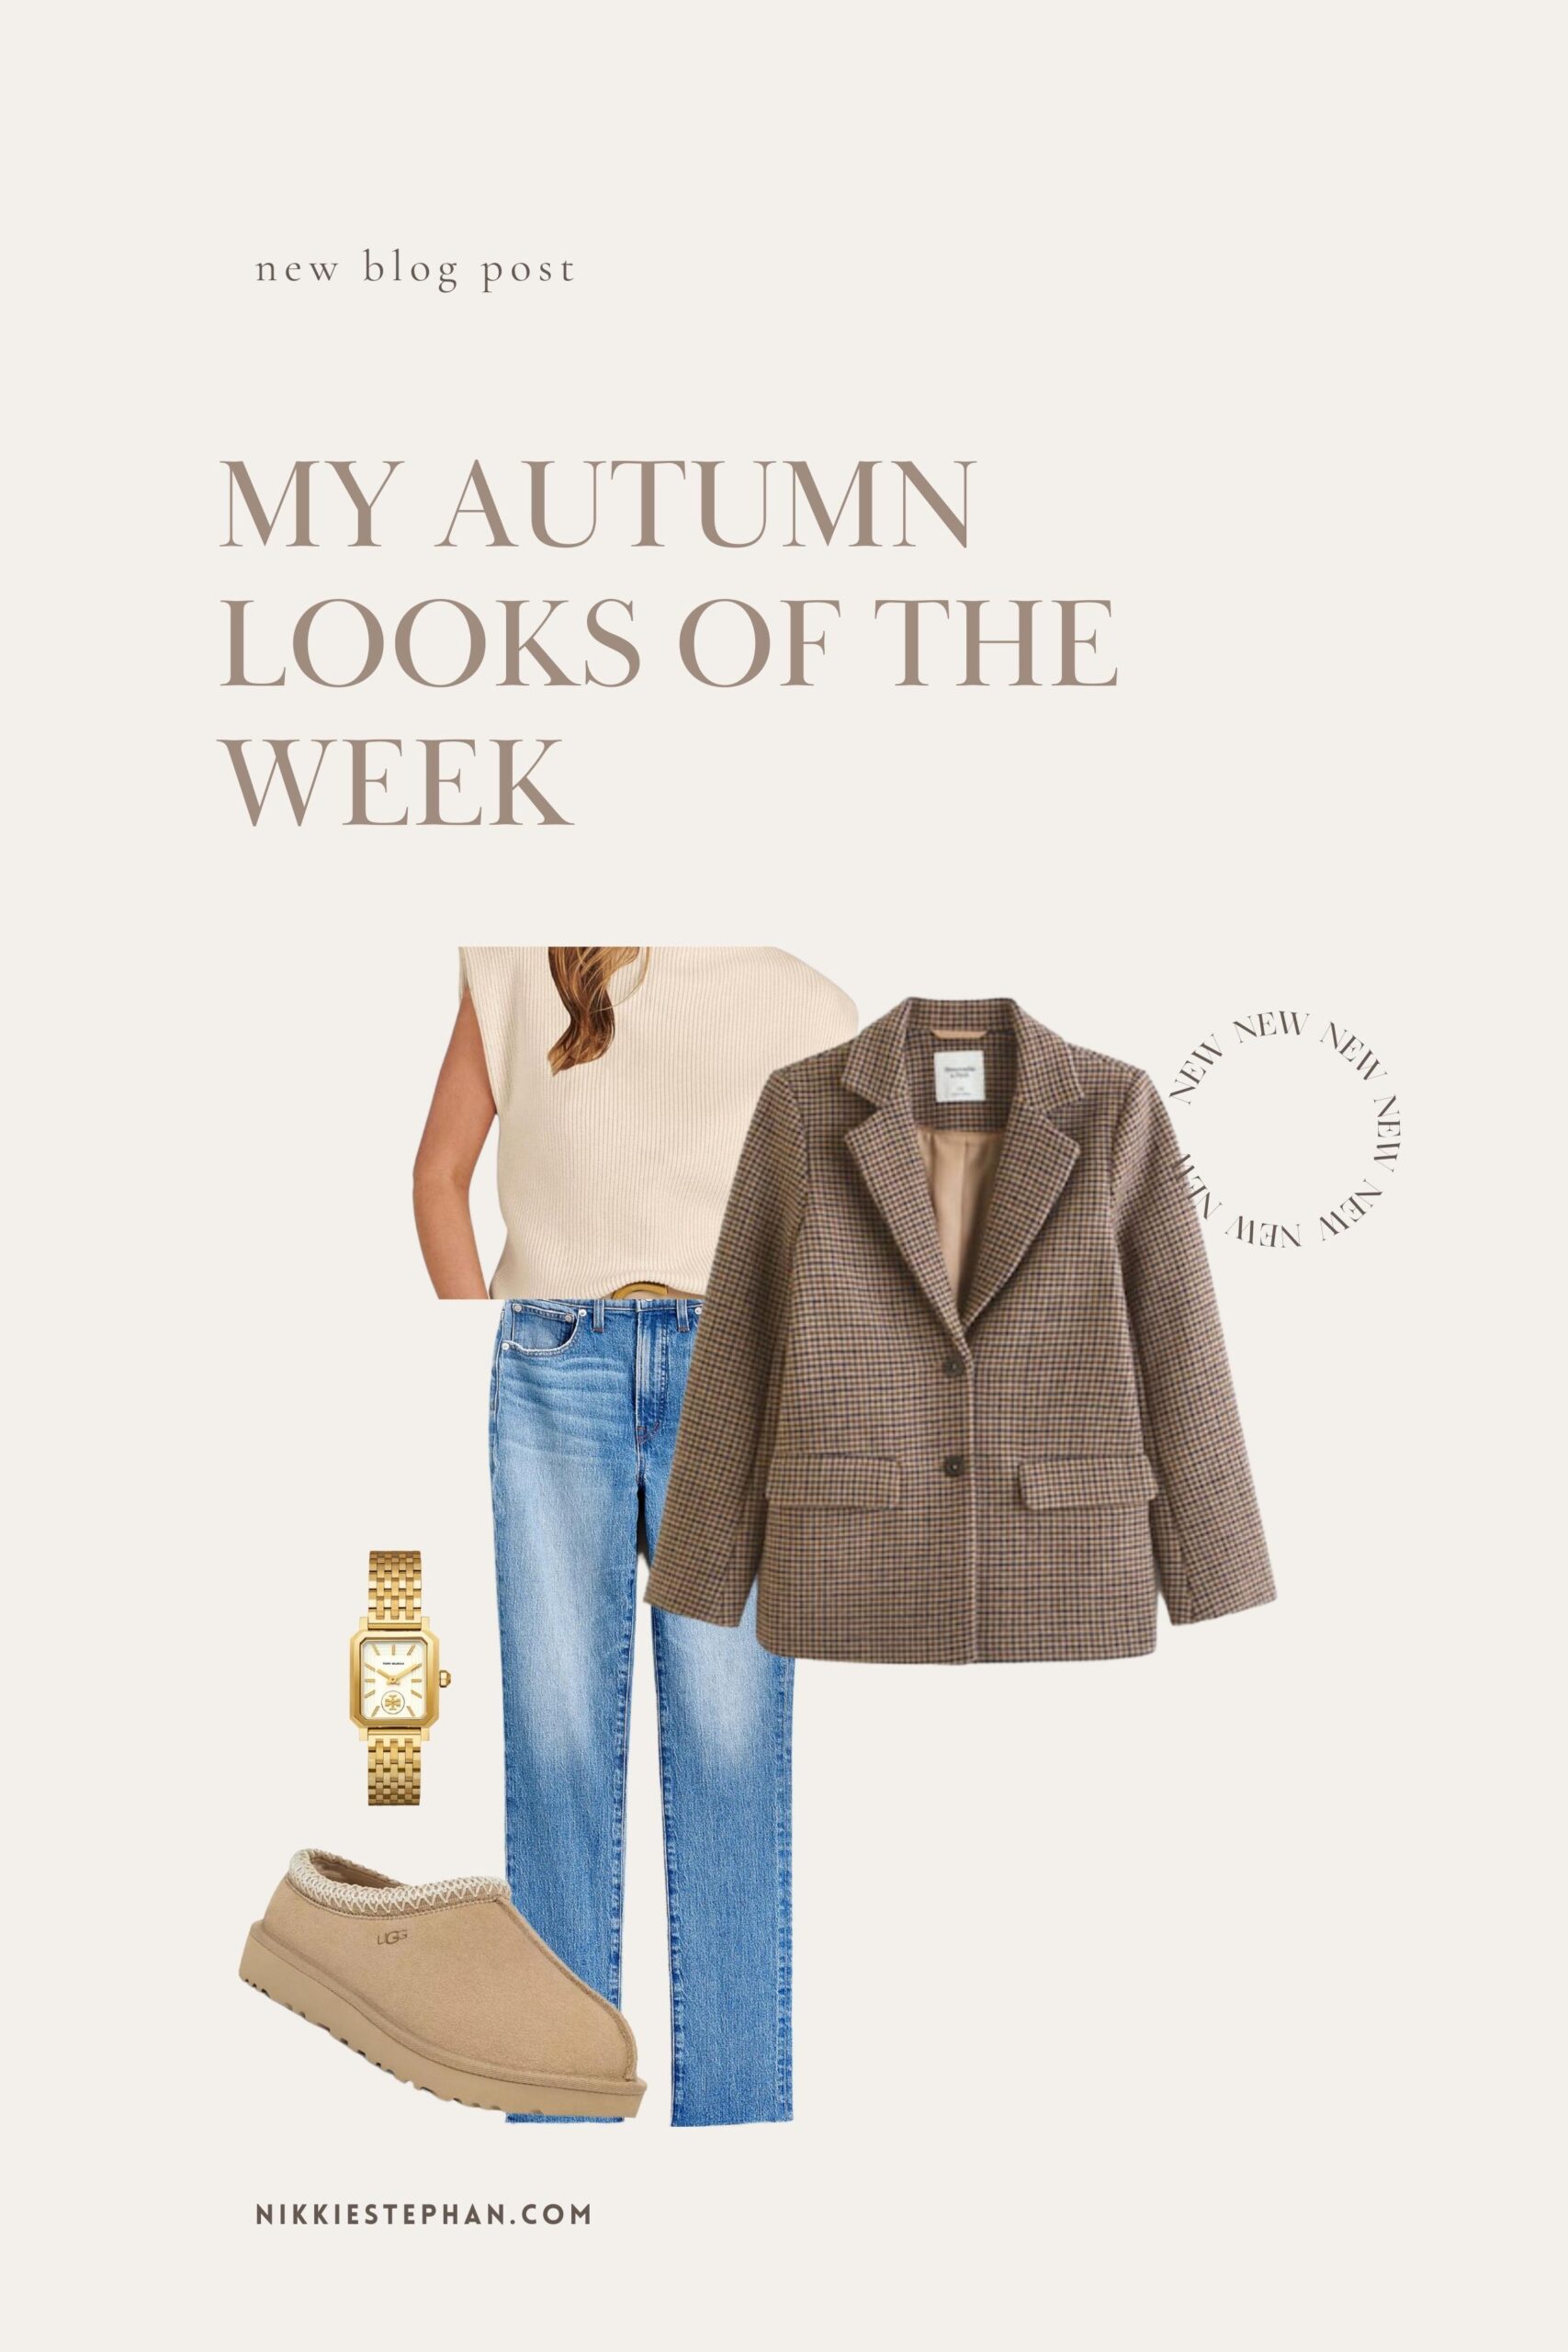 MY AUTUMN LOOKS OF THE WEEK